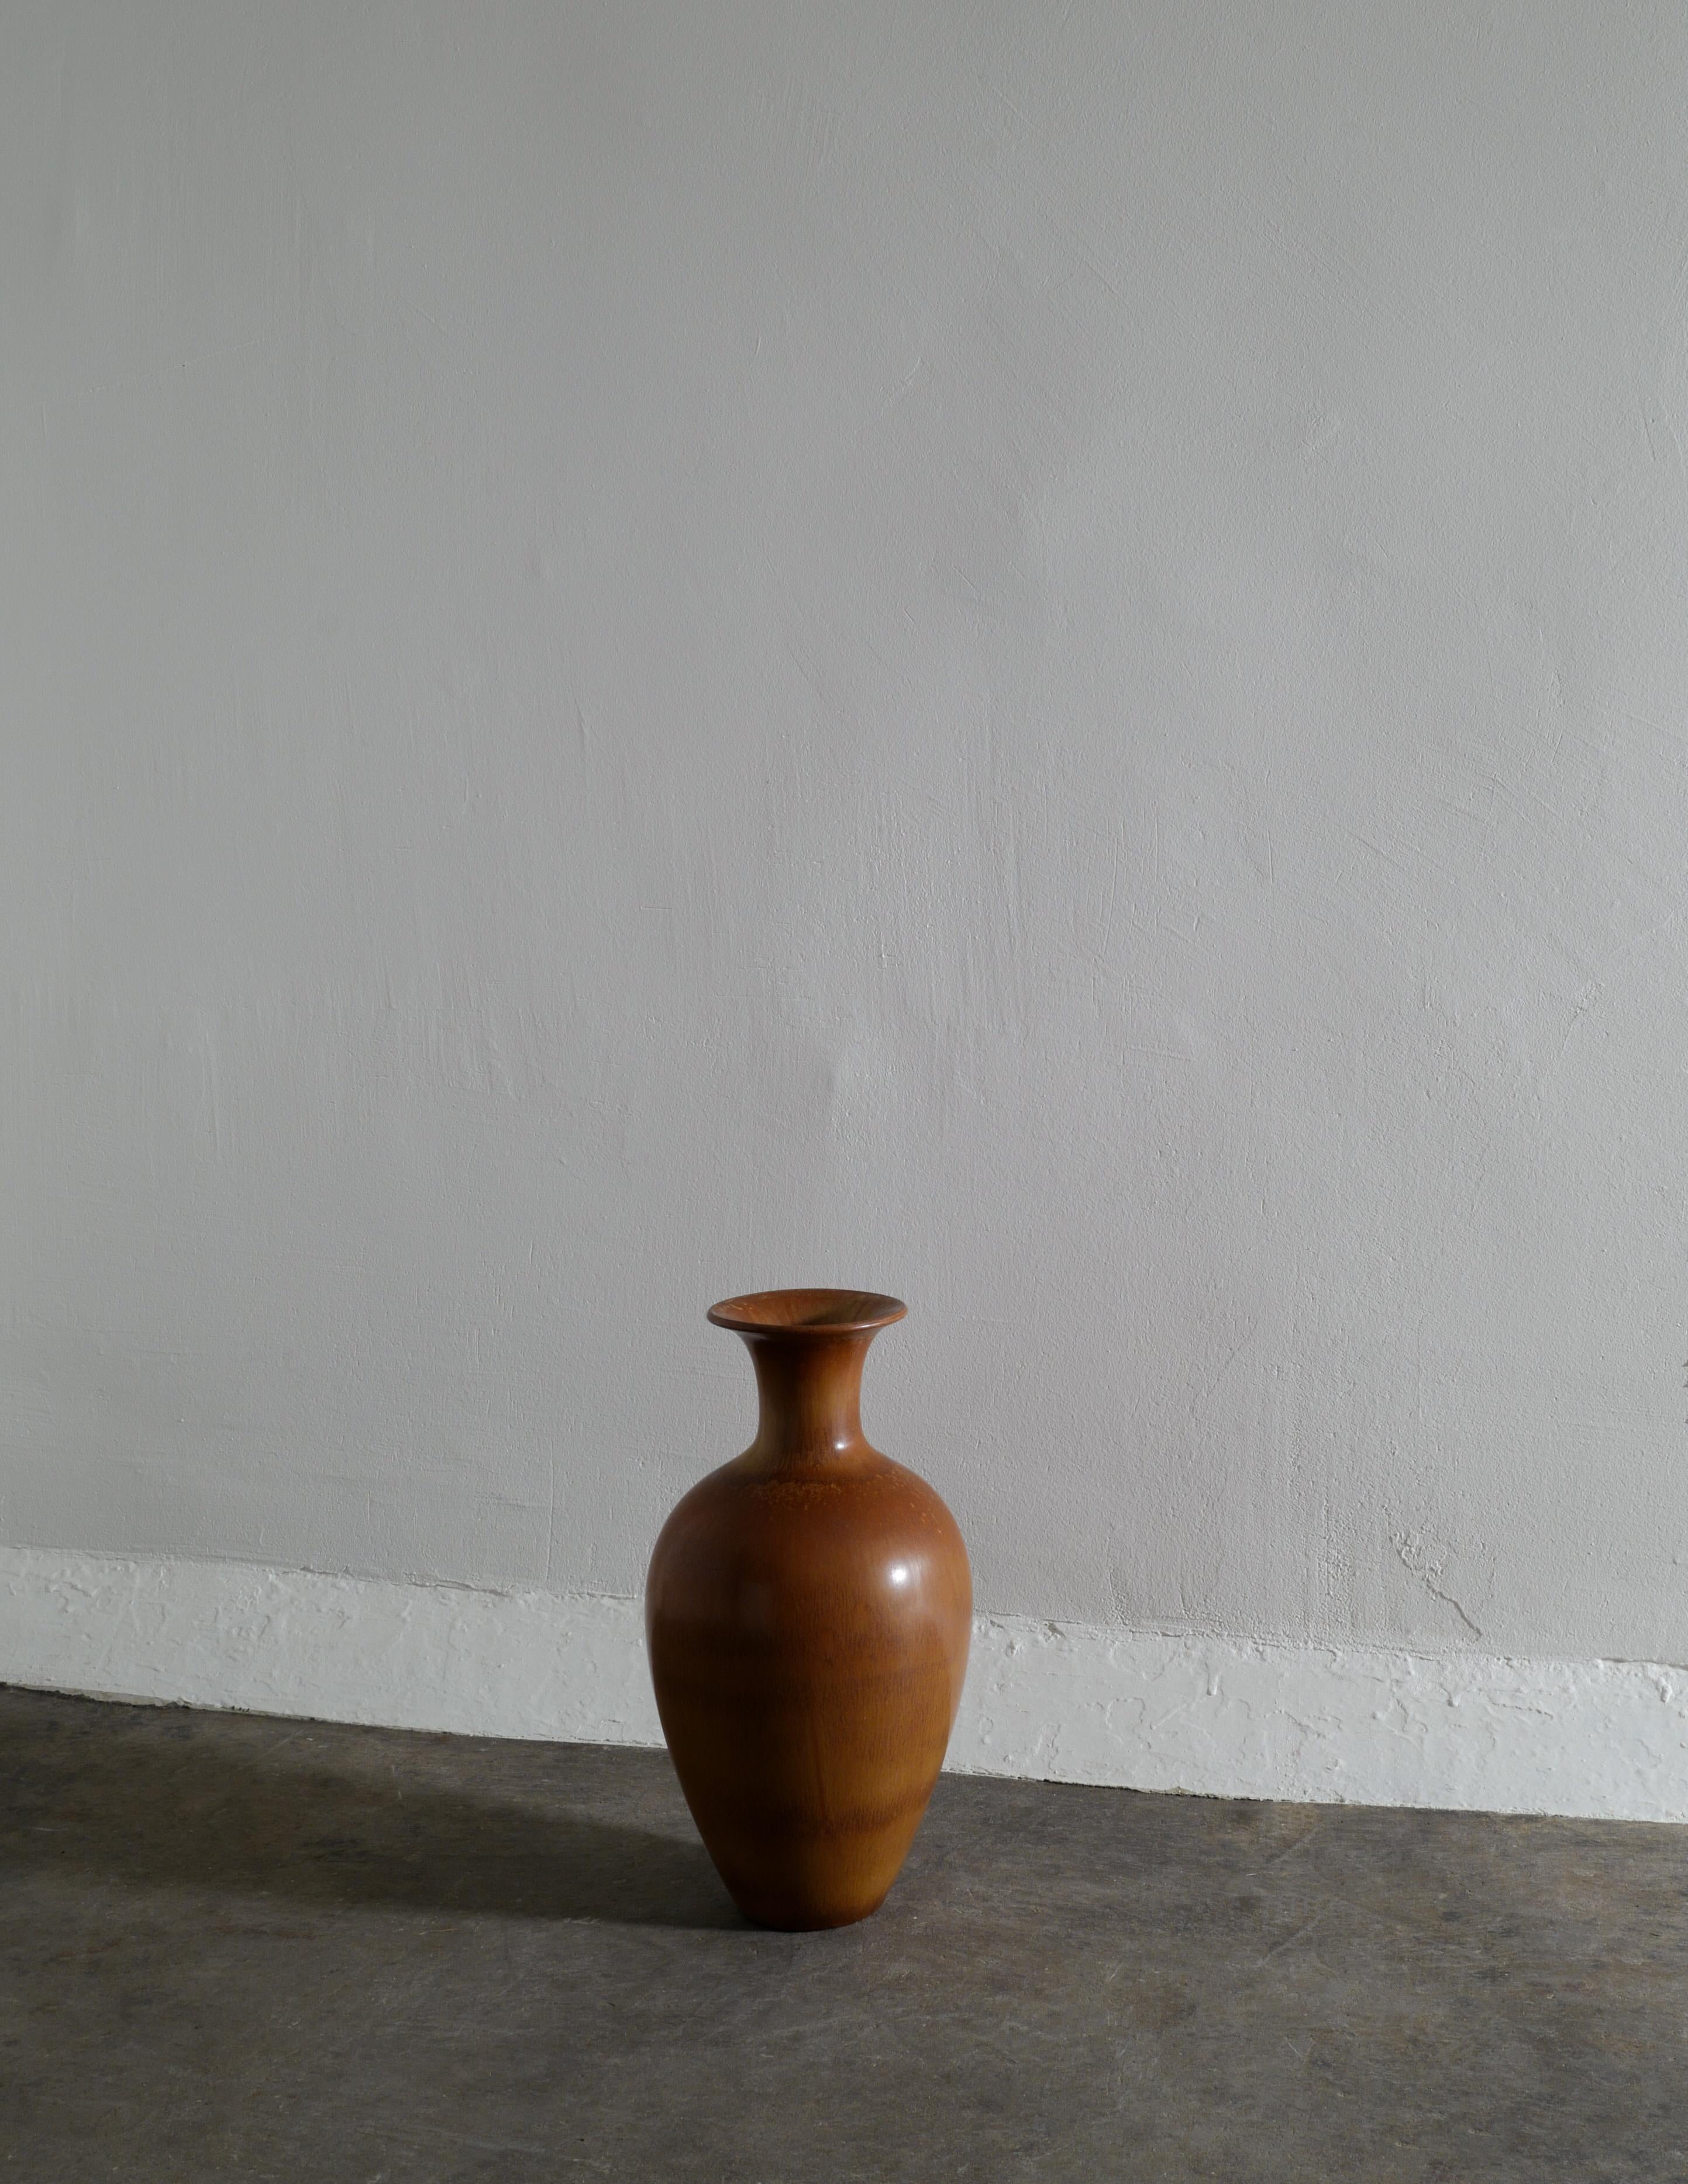 Rare mid century floor vase in a brown glaze designed and made by Gunnar Nylund for Rörstrand Sweden in the 1950s. In good vintage condition with small signs from age and use. Signed 